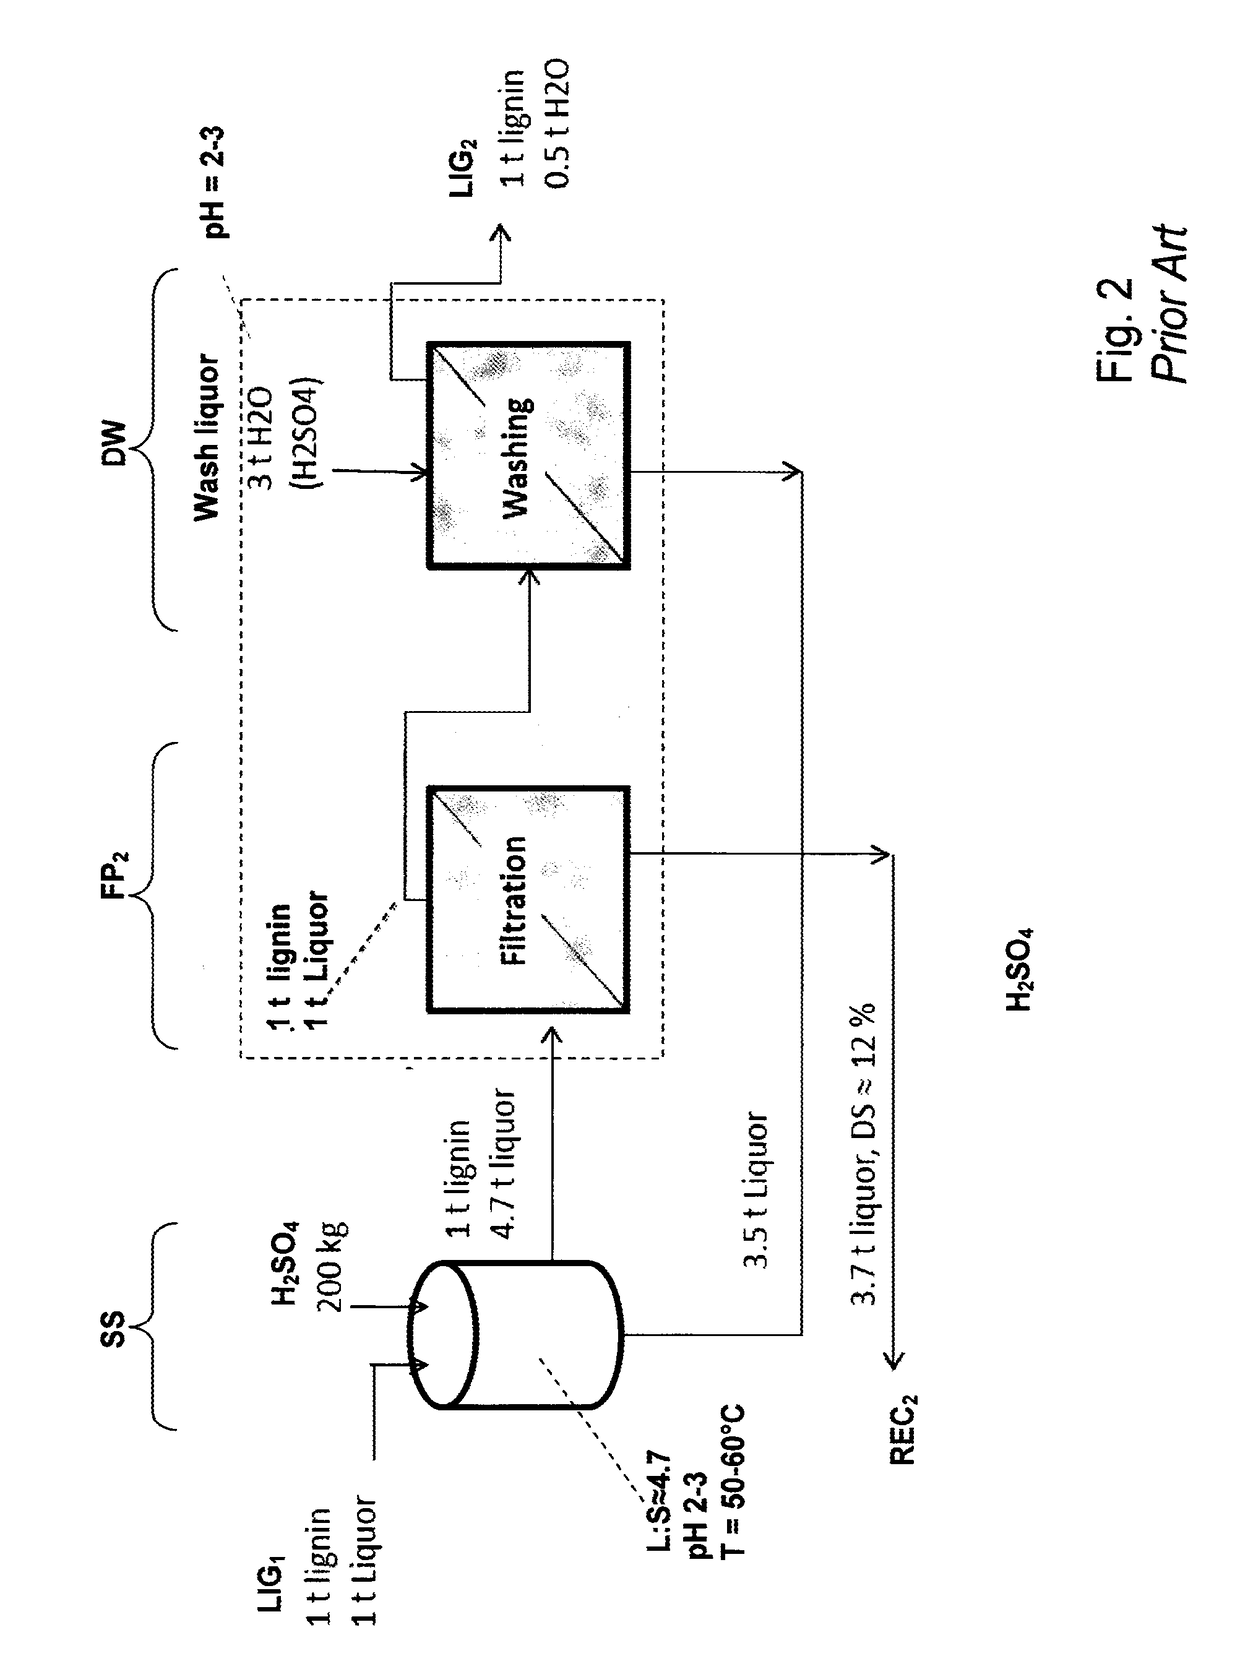 Method for producing high purity lignin